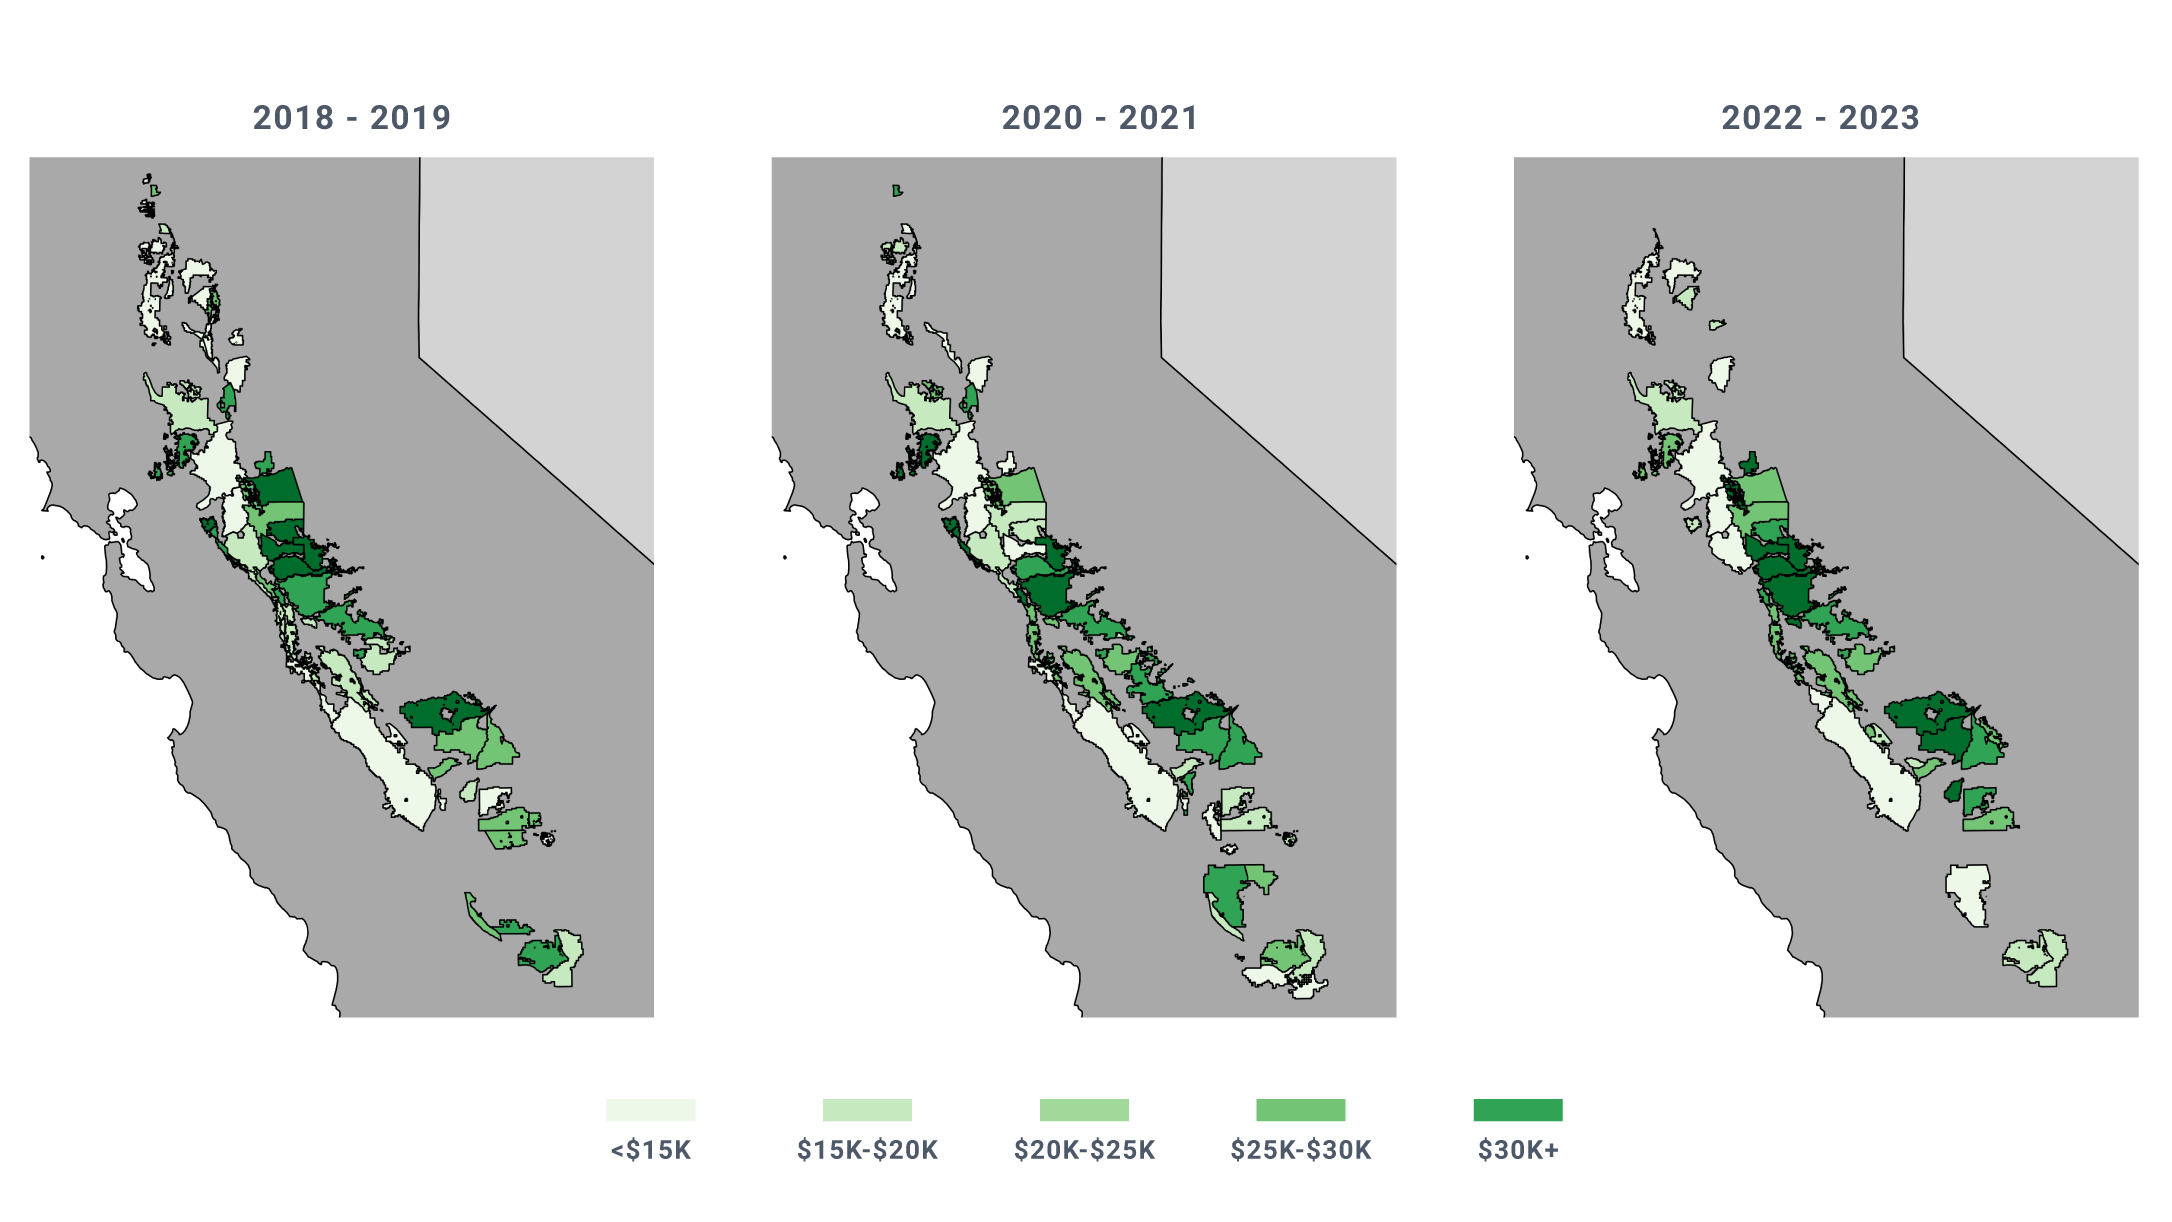 Figure 7. Median Price per Acre for Annual Crops across Agricultural Water Districts in the Central Valley.